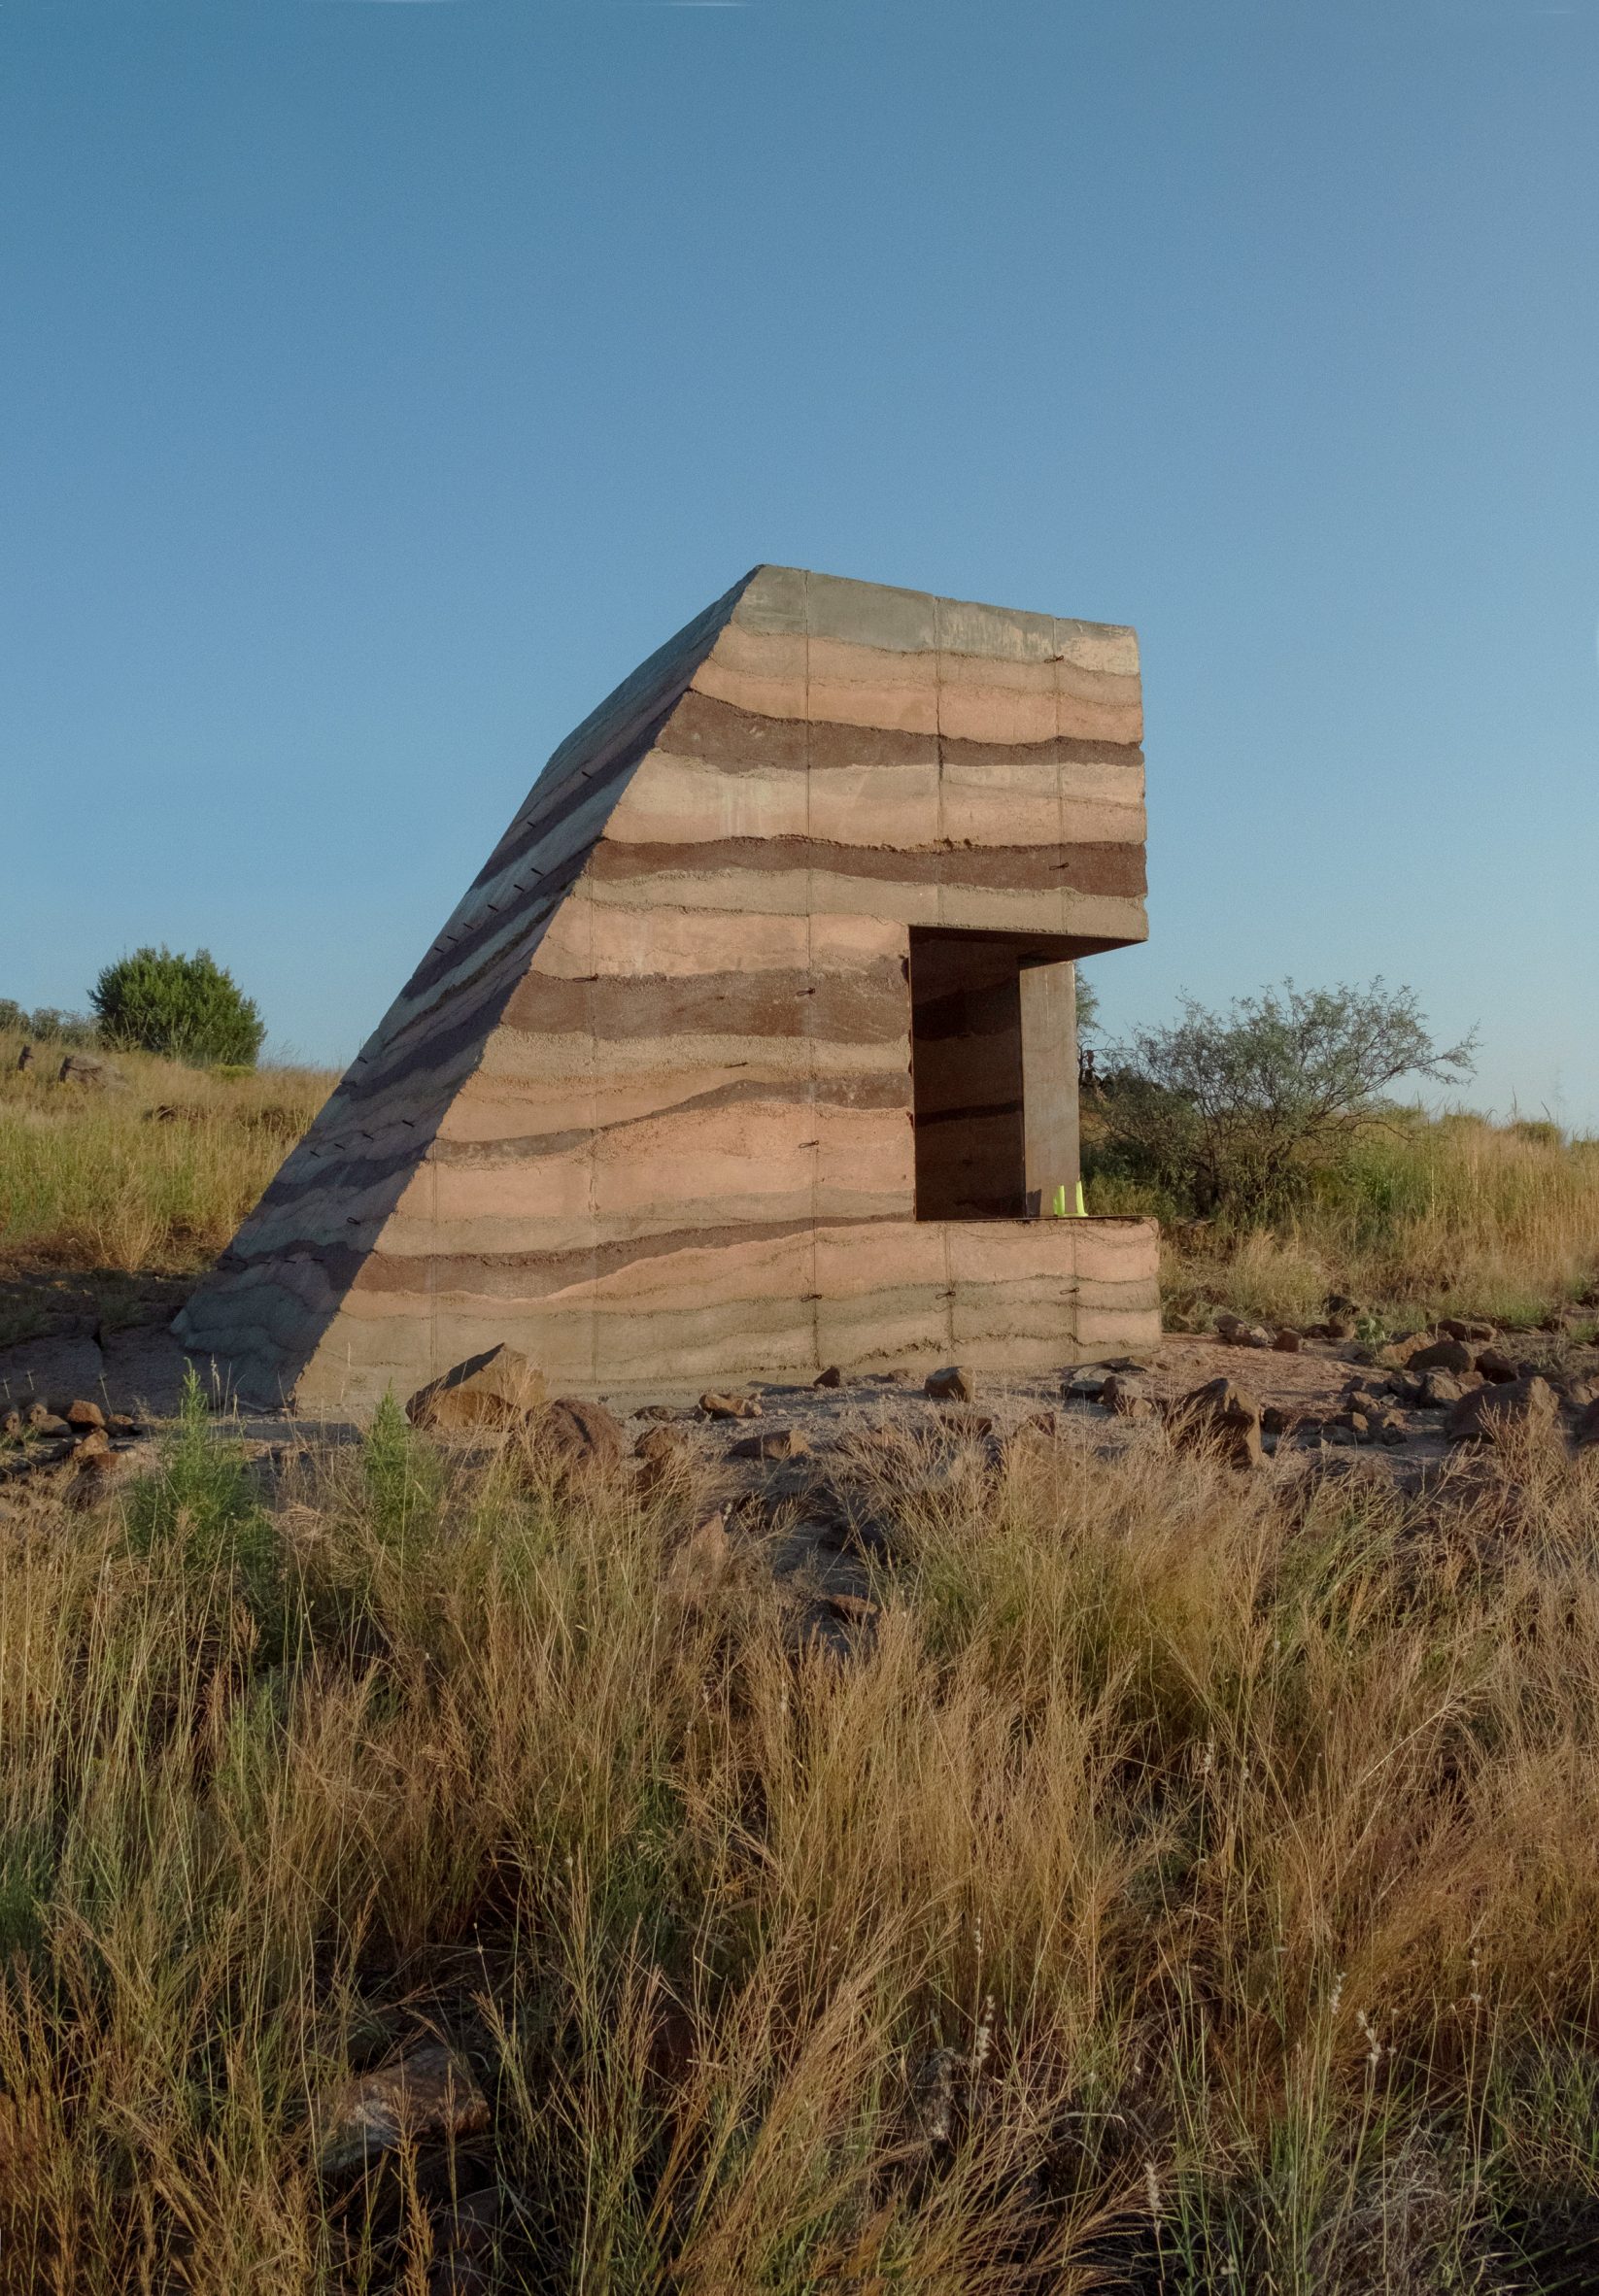 Rammed-earth shelter with window in the side